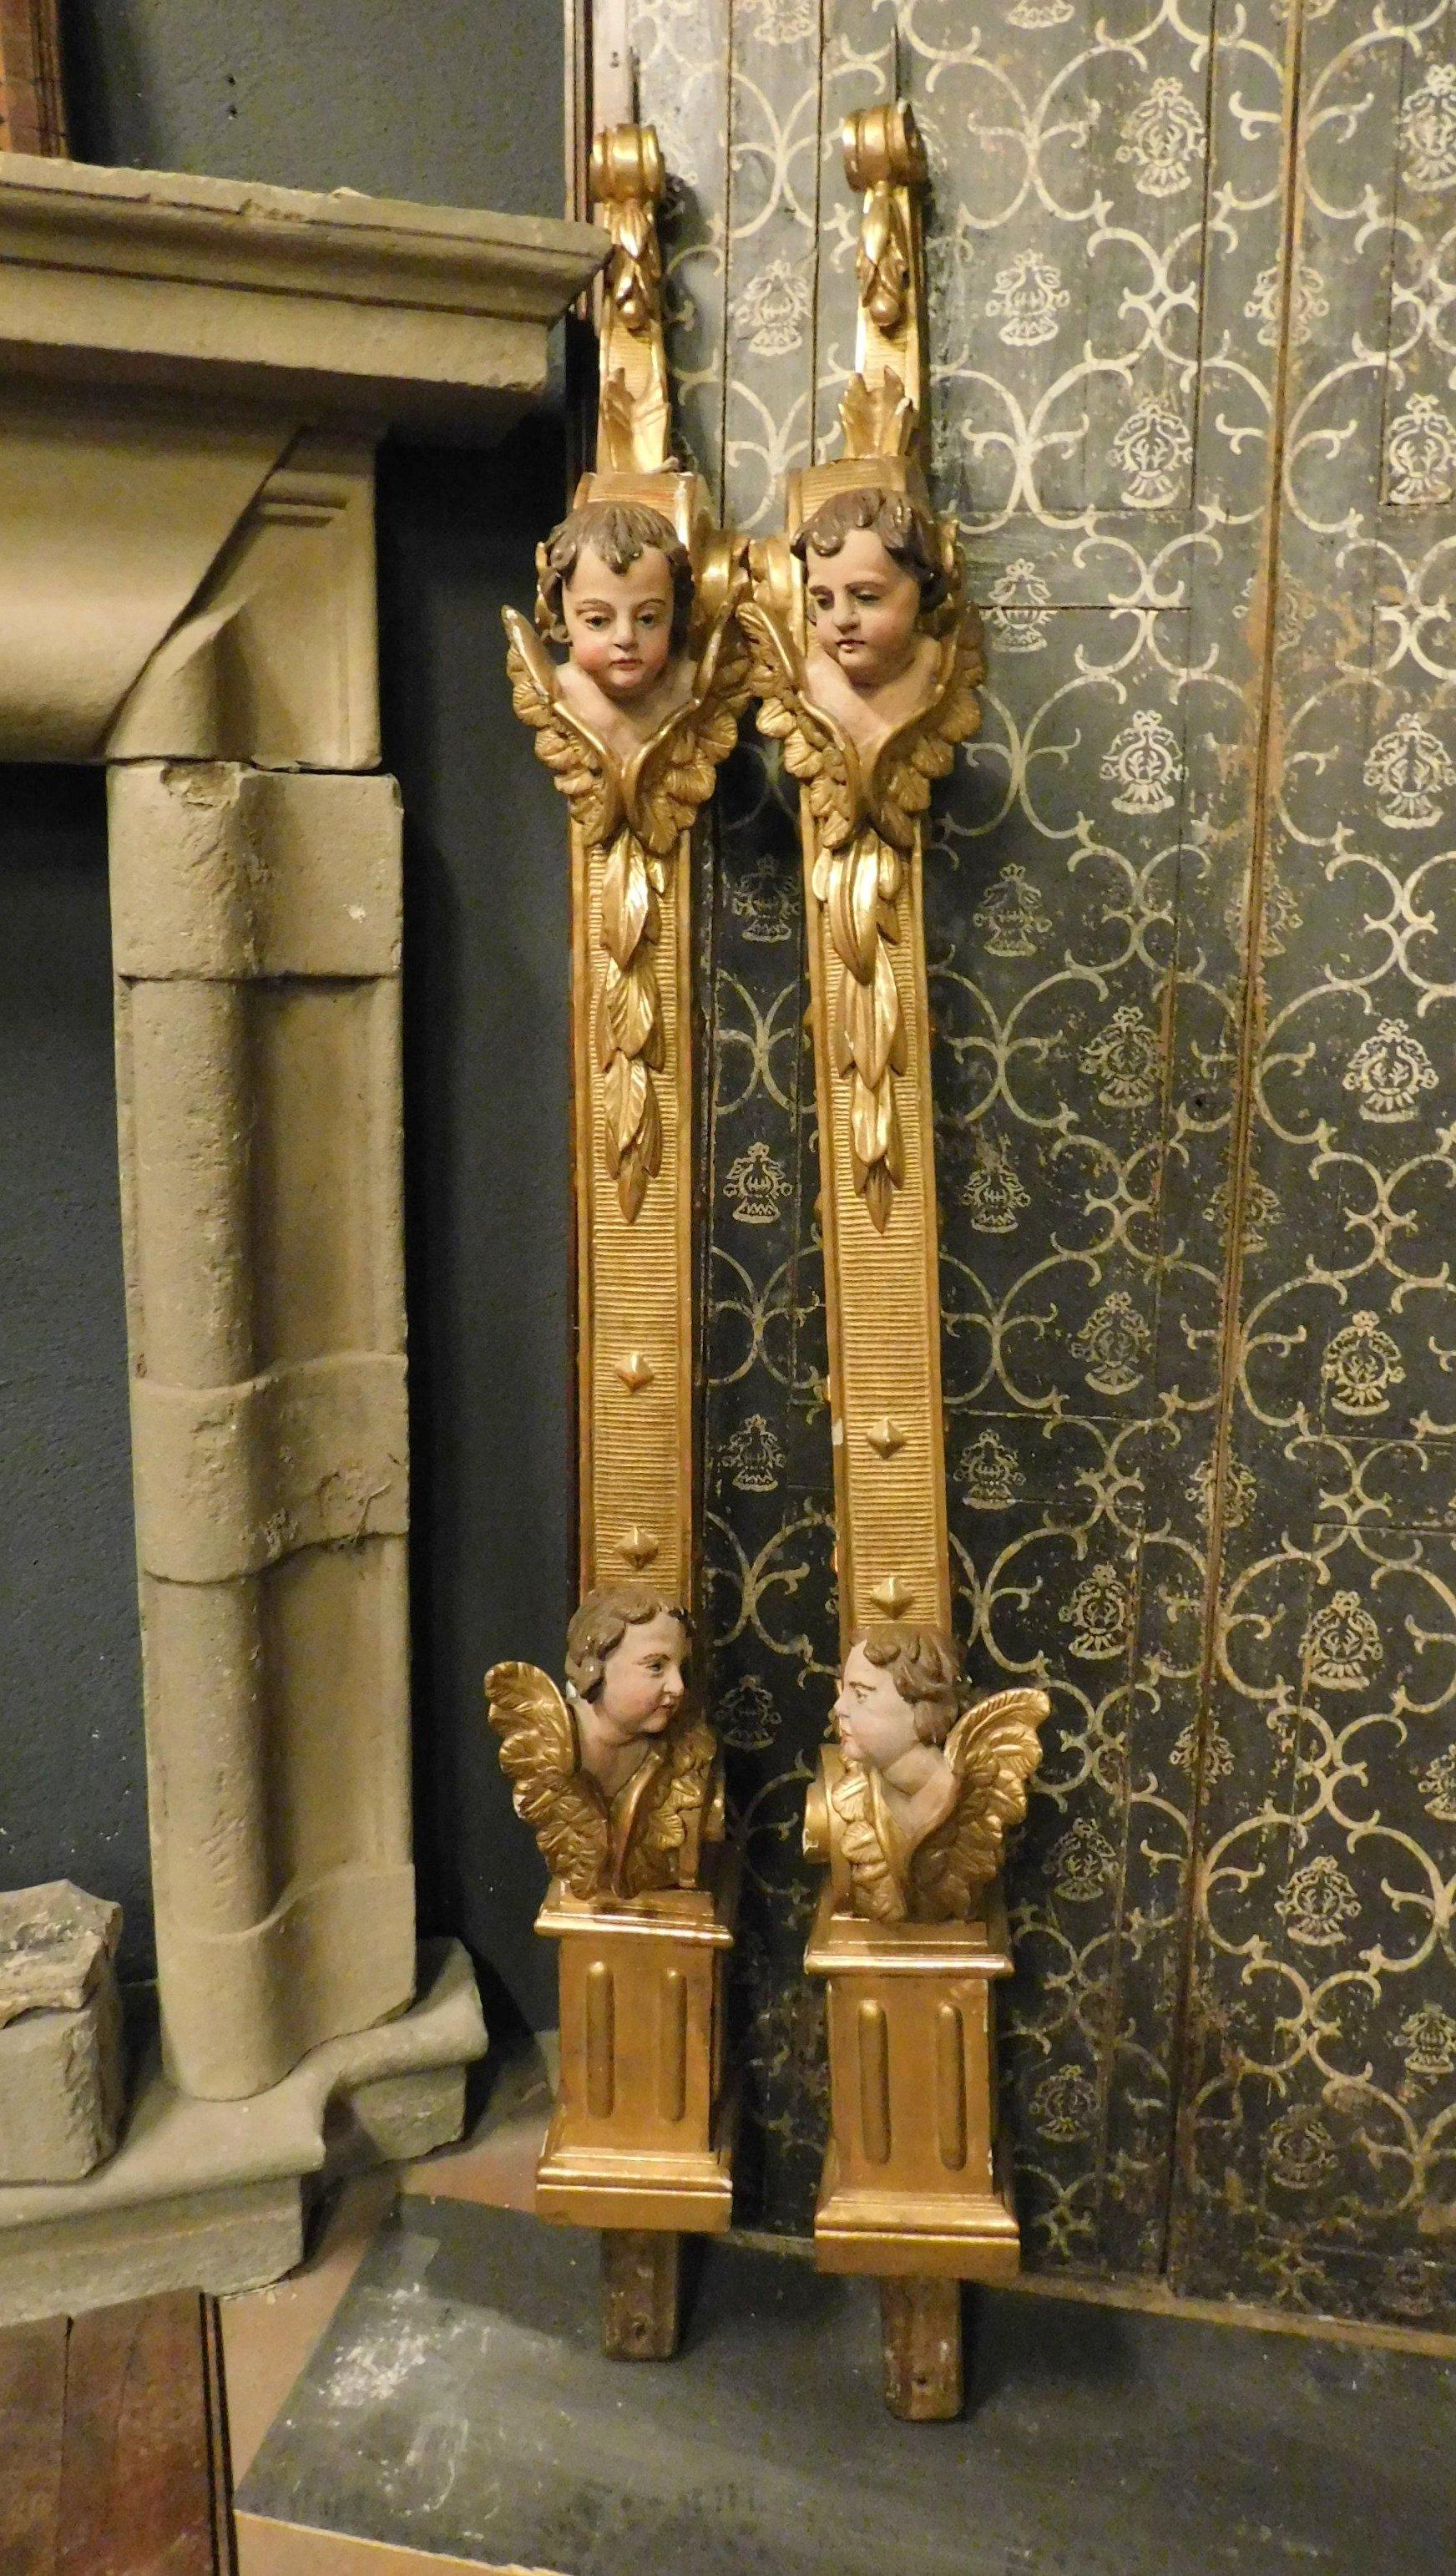 Ancient pair of uprights / columns, hand-carved with important faces of painted cherubs and gilded decorations, precious and finely sculpted scrolls by a typical artist of the full 1700s in Italy.
They were altar posts or church dais, given the